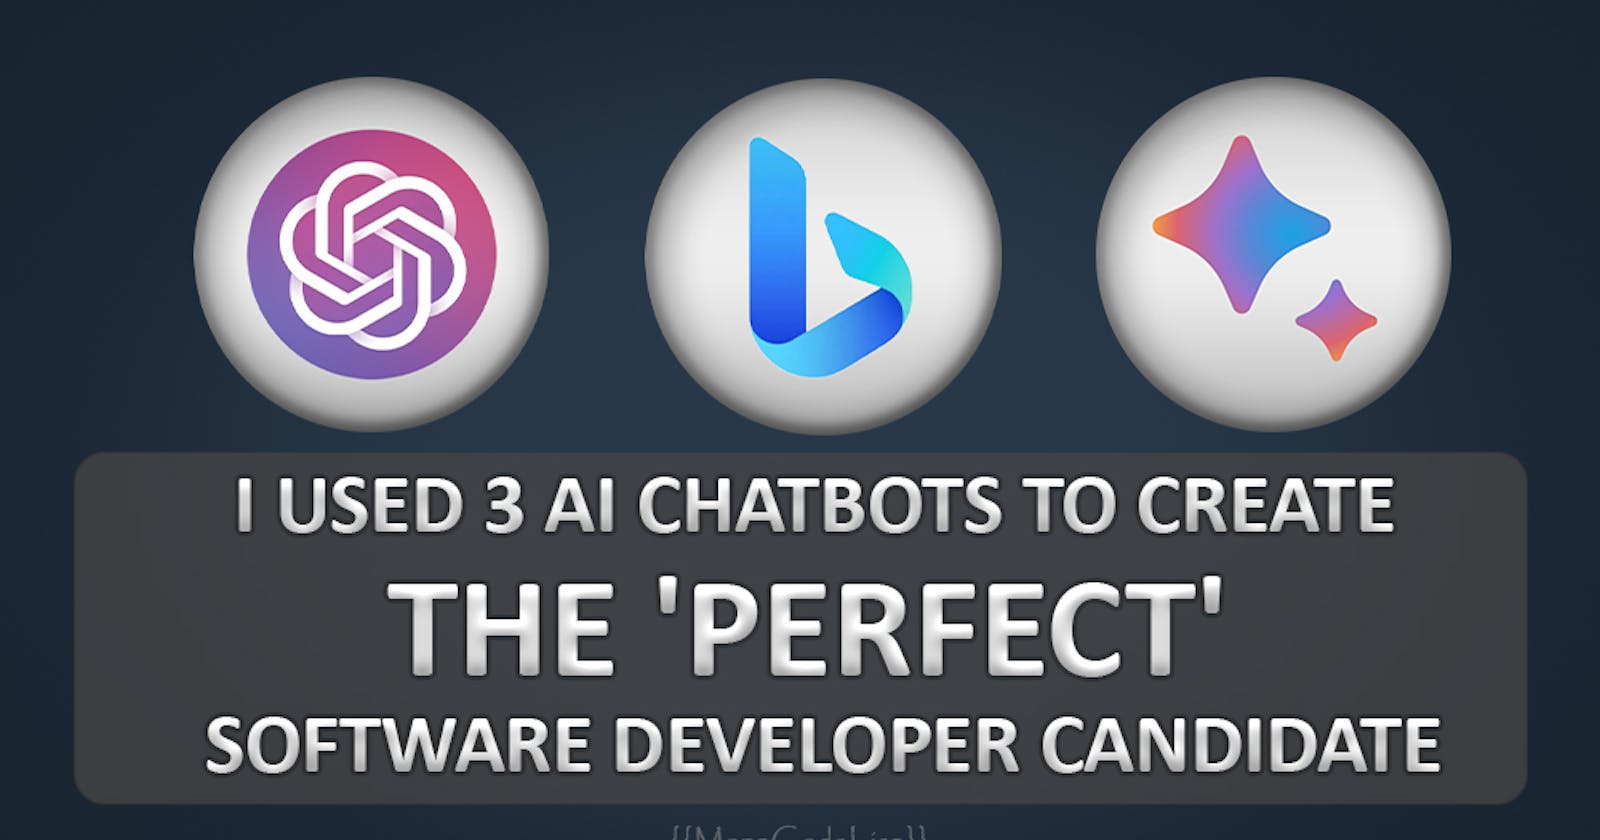 I used 3 AI ChatBots to Create The 'Perfect' Software Developer Candidate